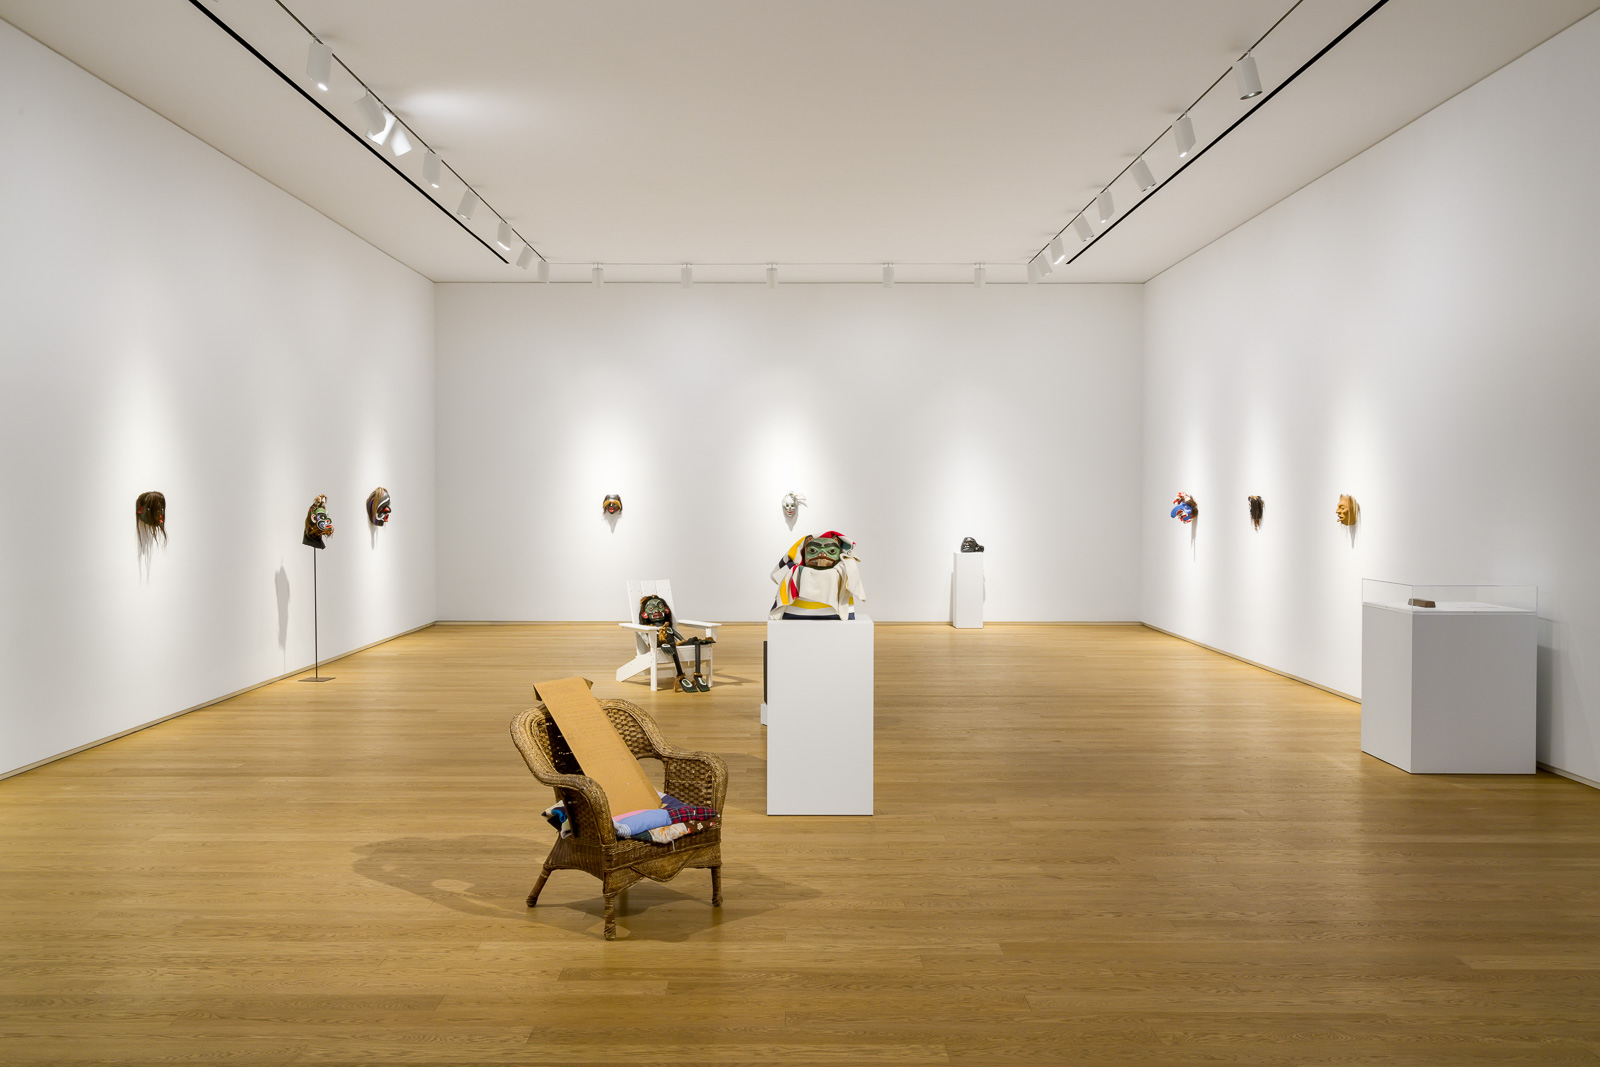 Beau Dick, Devoured by Consumerism, Installation view, Remai Modern, 2019. Photo: Blaine Campbell